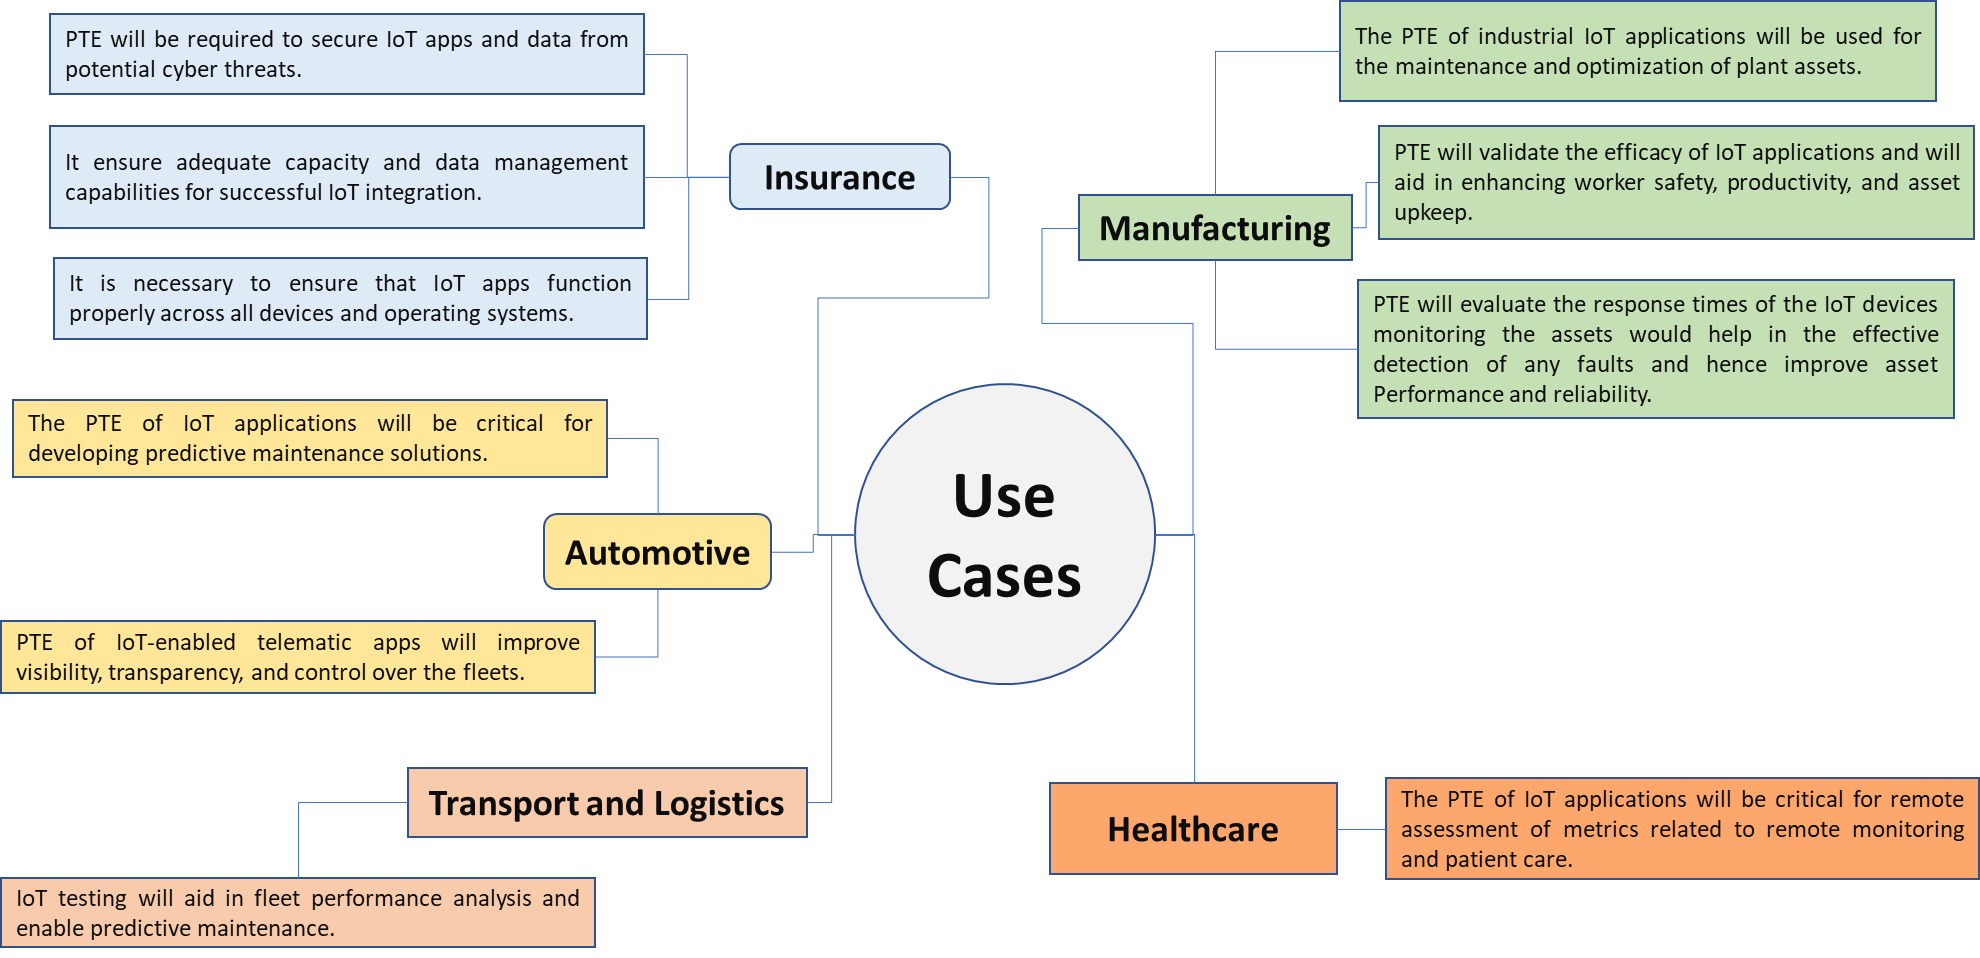 Use Cases in Testing and IoT Application